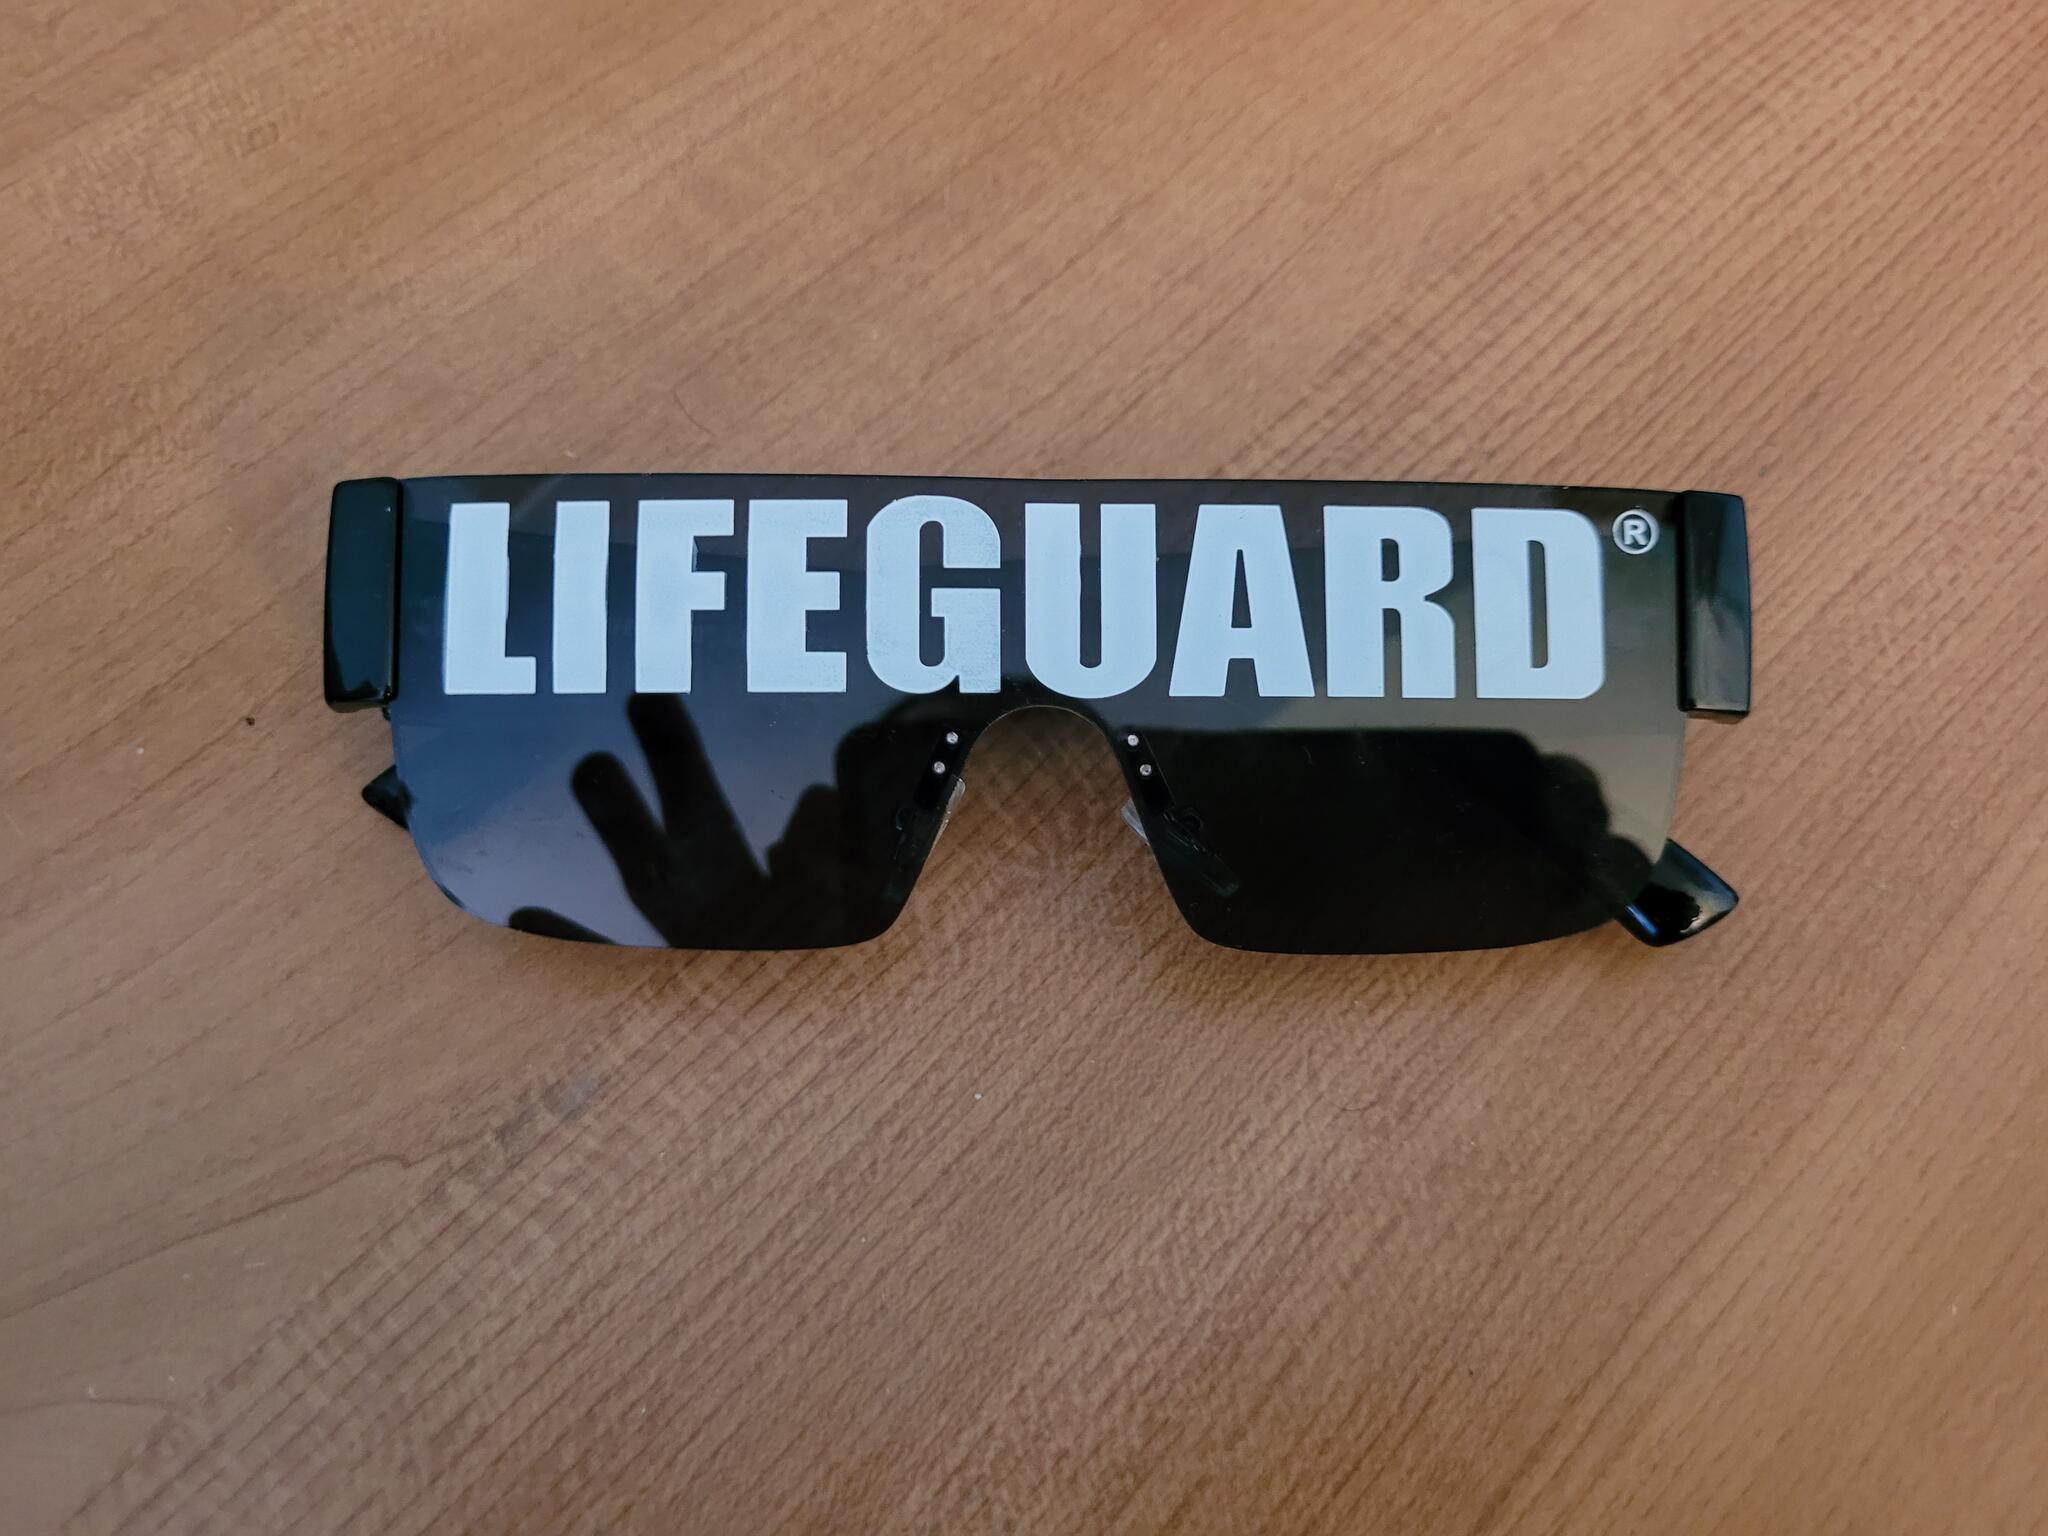 Lifeguard Sunglasses For $2 In Indianapolis, IN